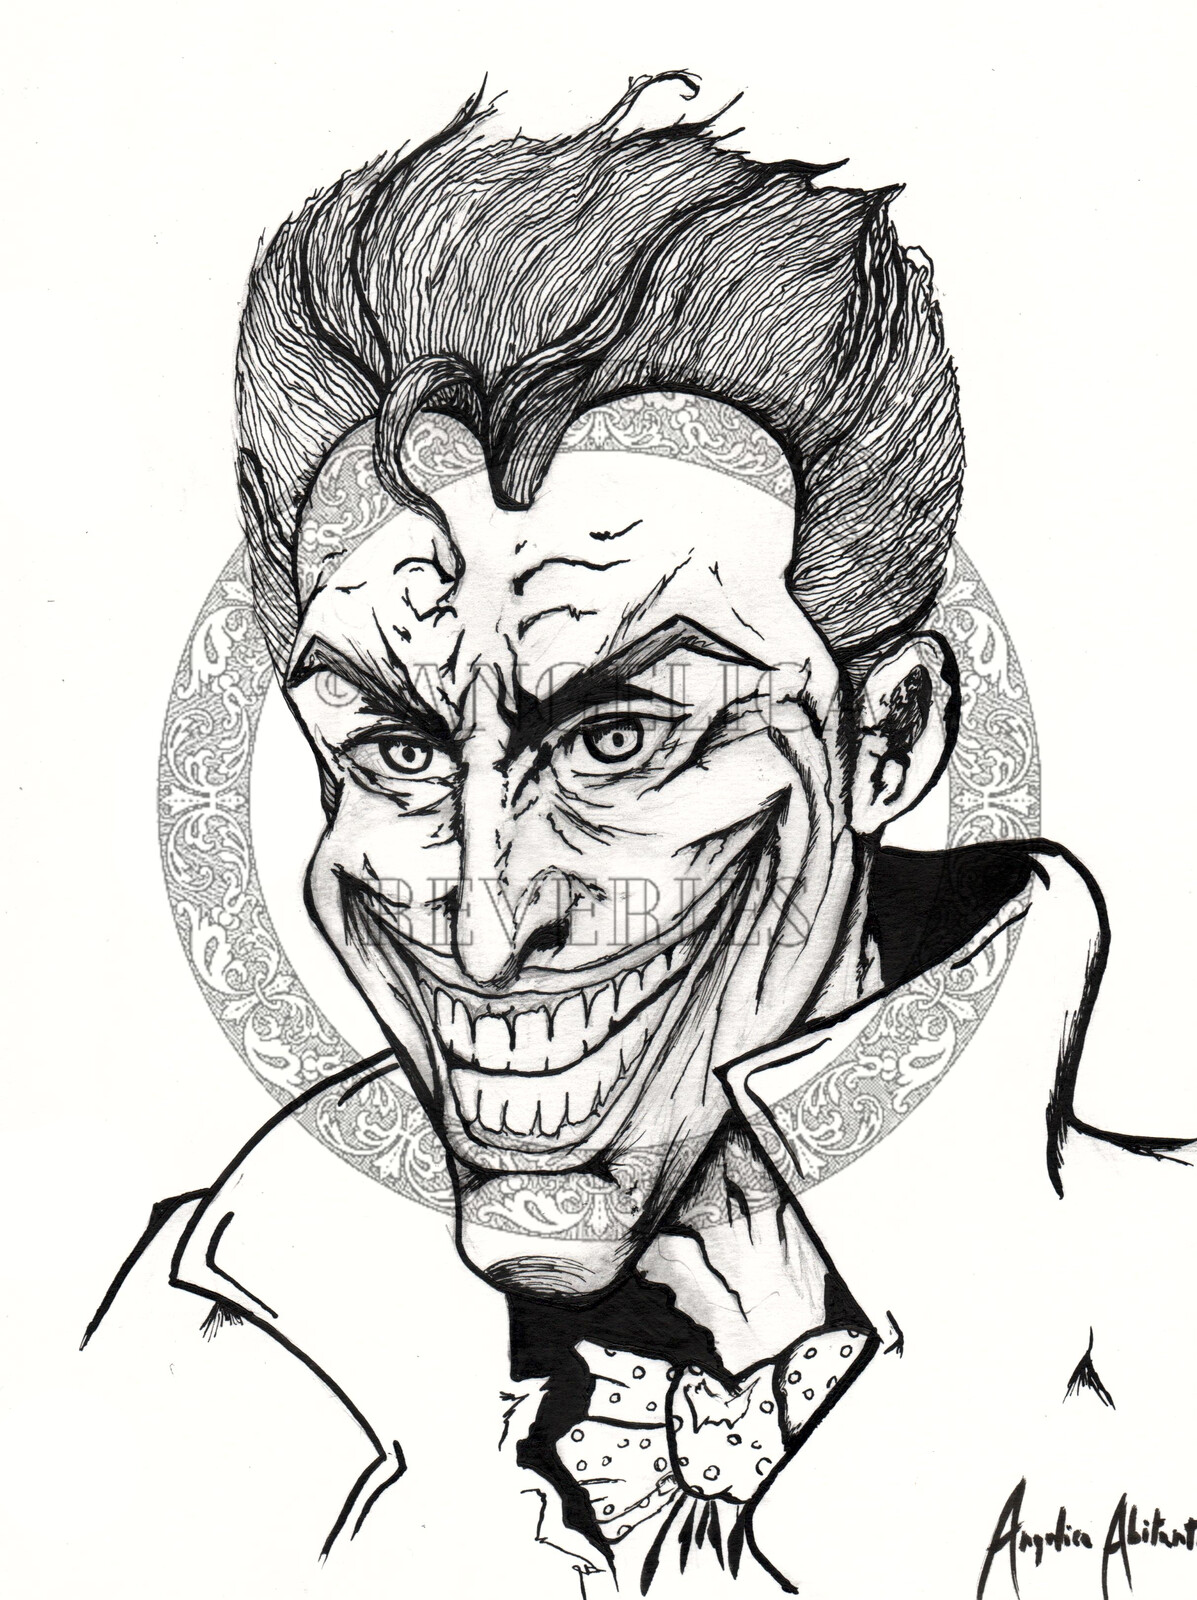 "Why so serious?"
Classic Joker design
Ink on paper